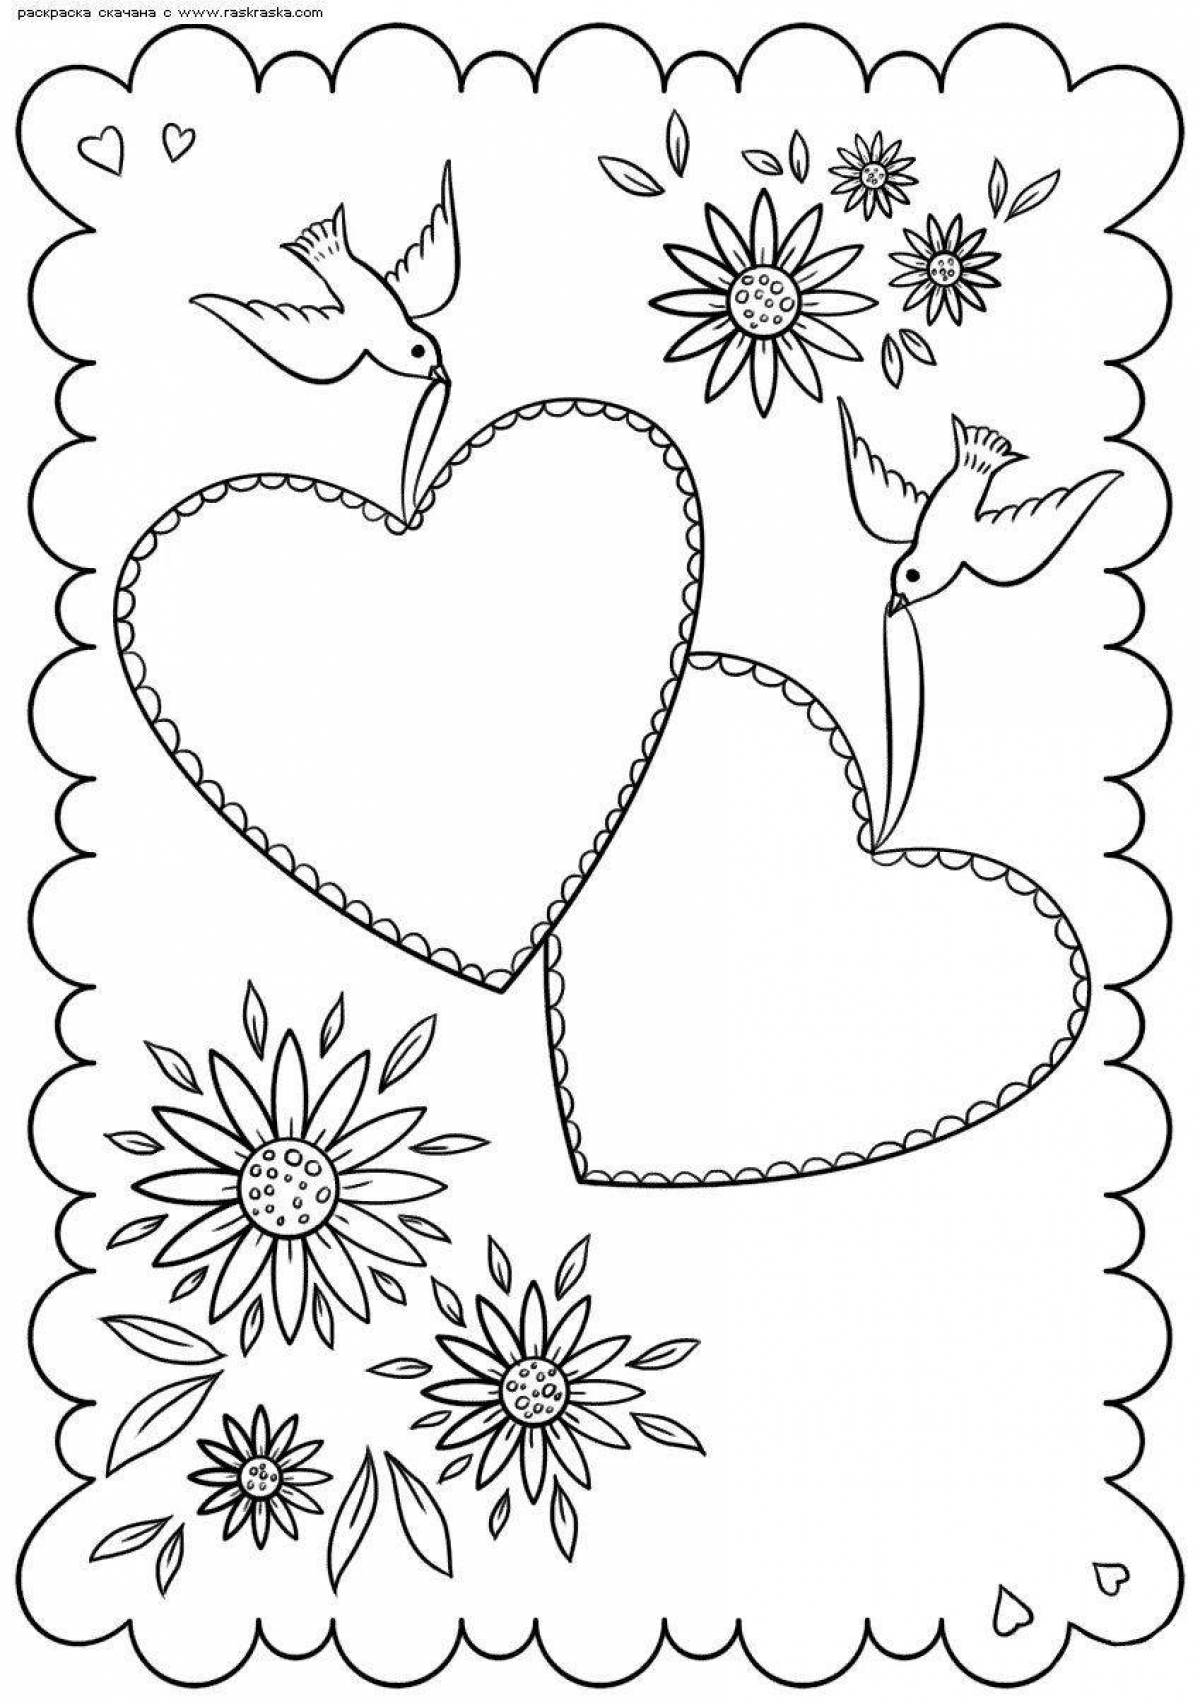 Coloring page funny mother's day card